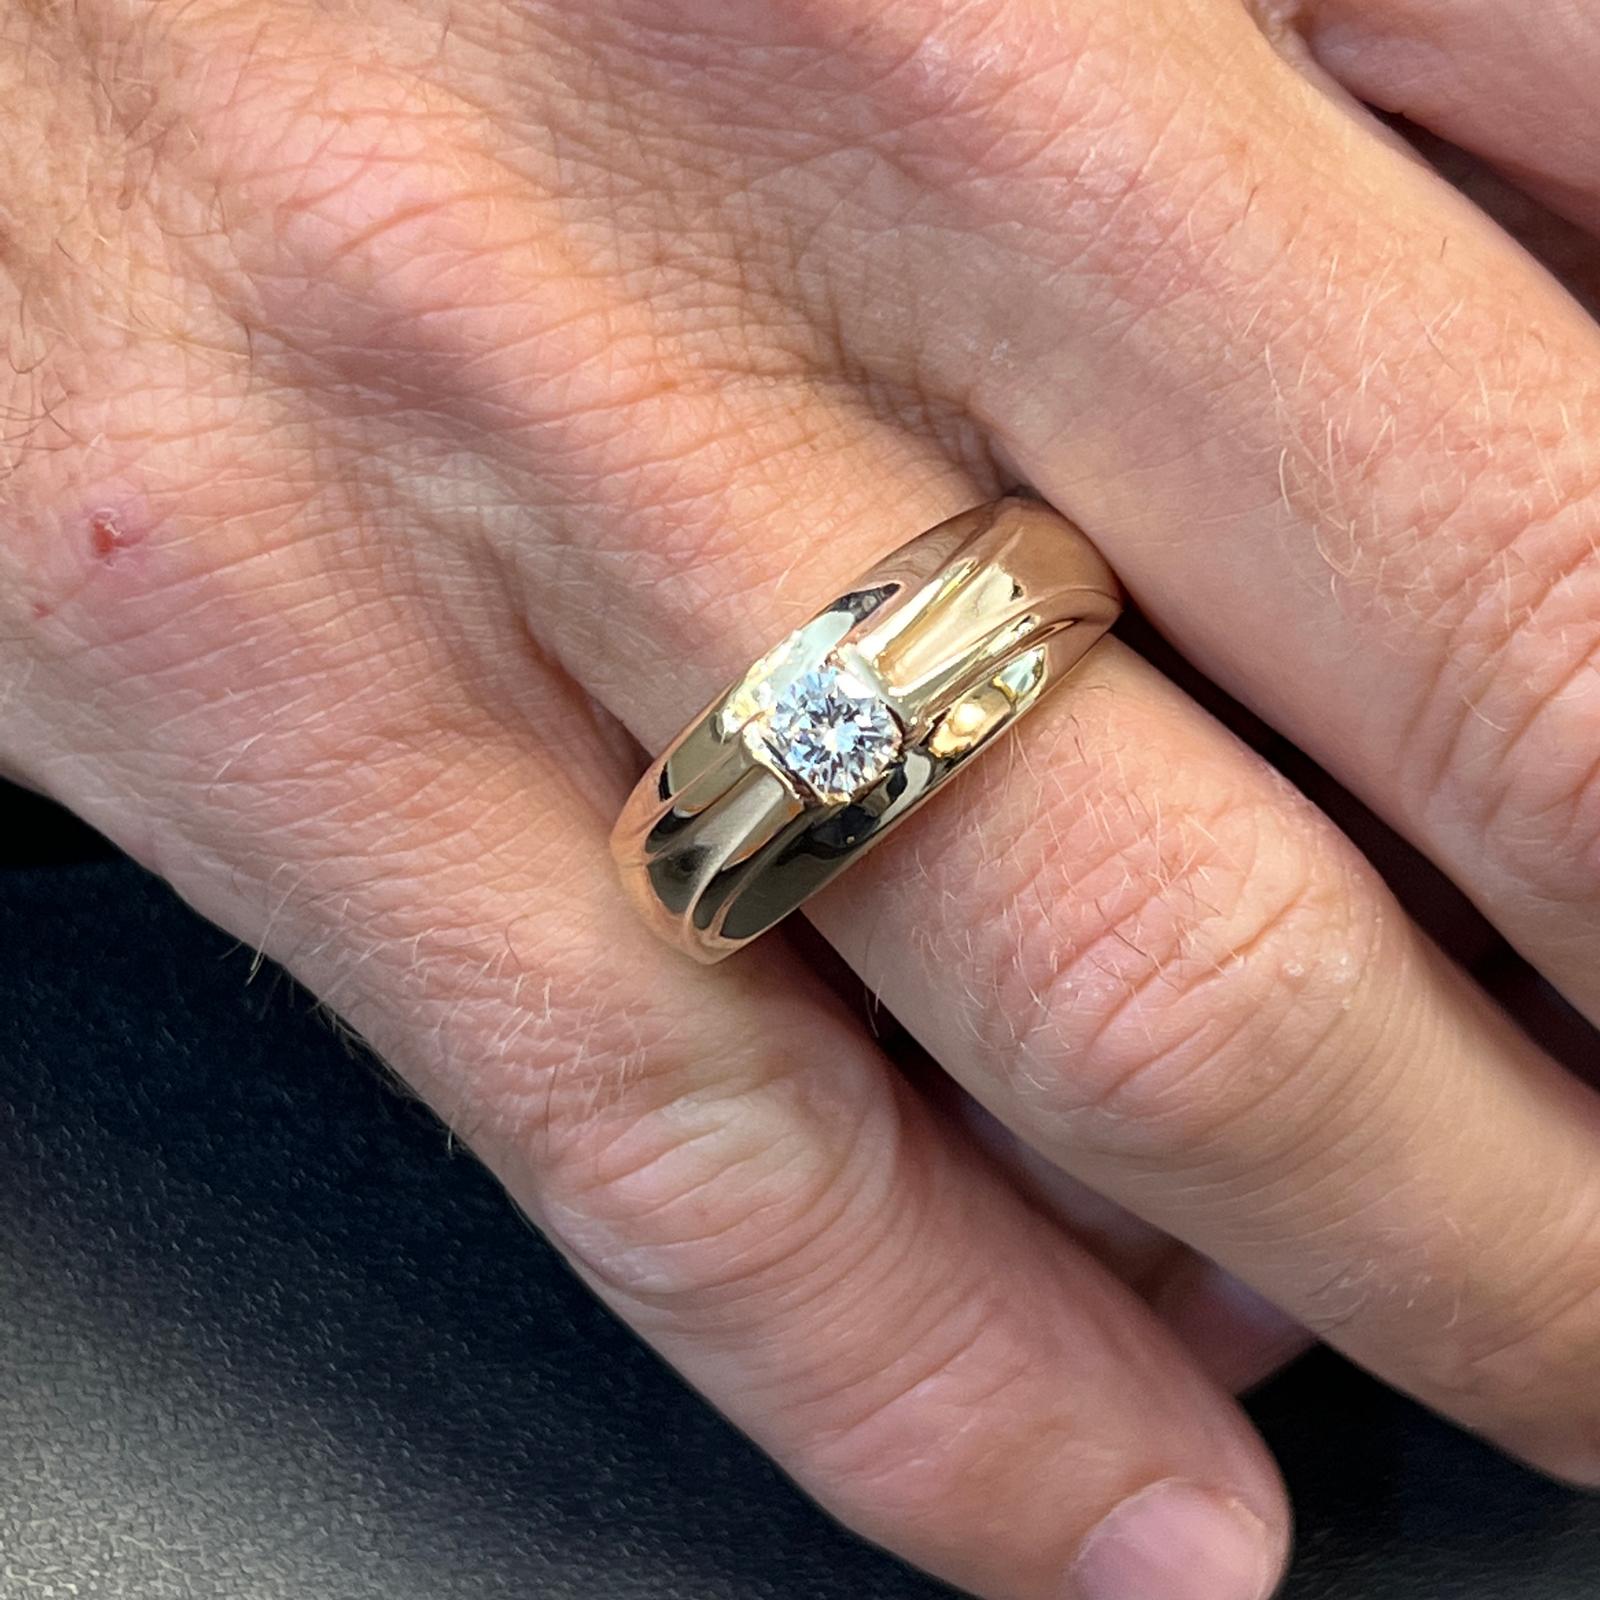 Men's diamond band fashioned in 14 karat yellow gold. The band features an approximately .47 carat round brilliant cut diamond graded H color and SI1 clarity. The band measures 5mm in width and is currently size 11.5 (can be sized). 